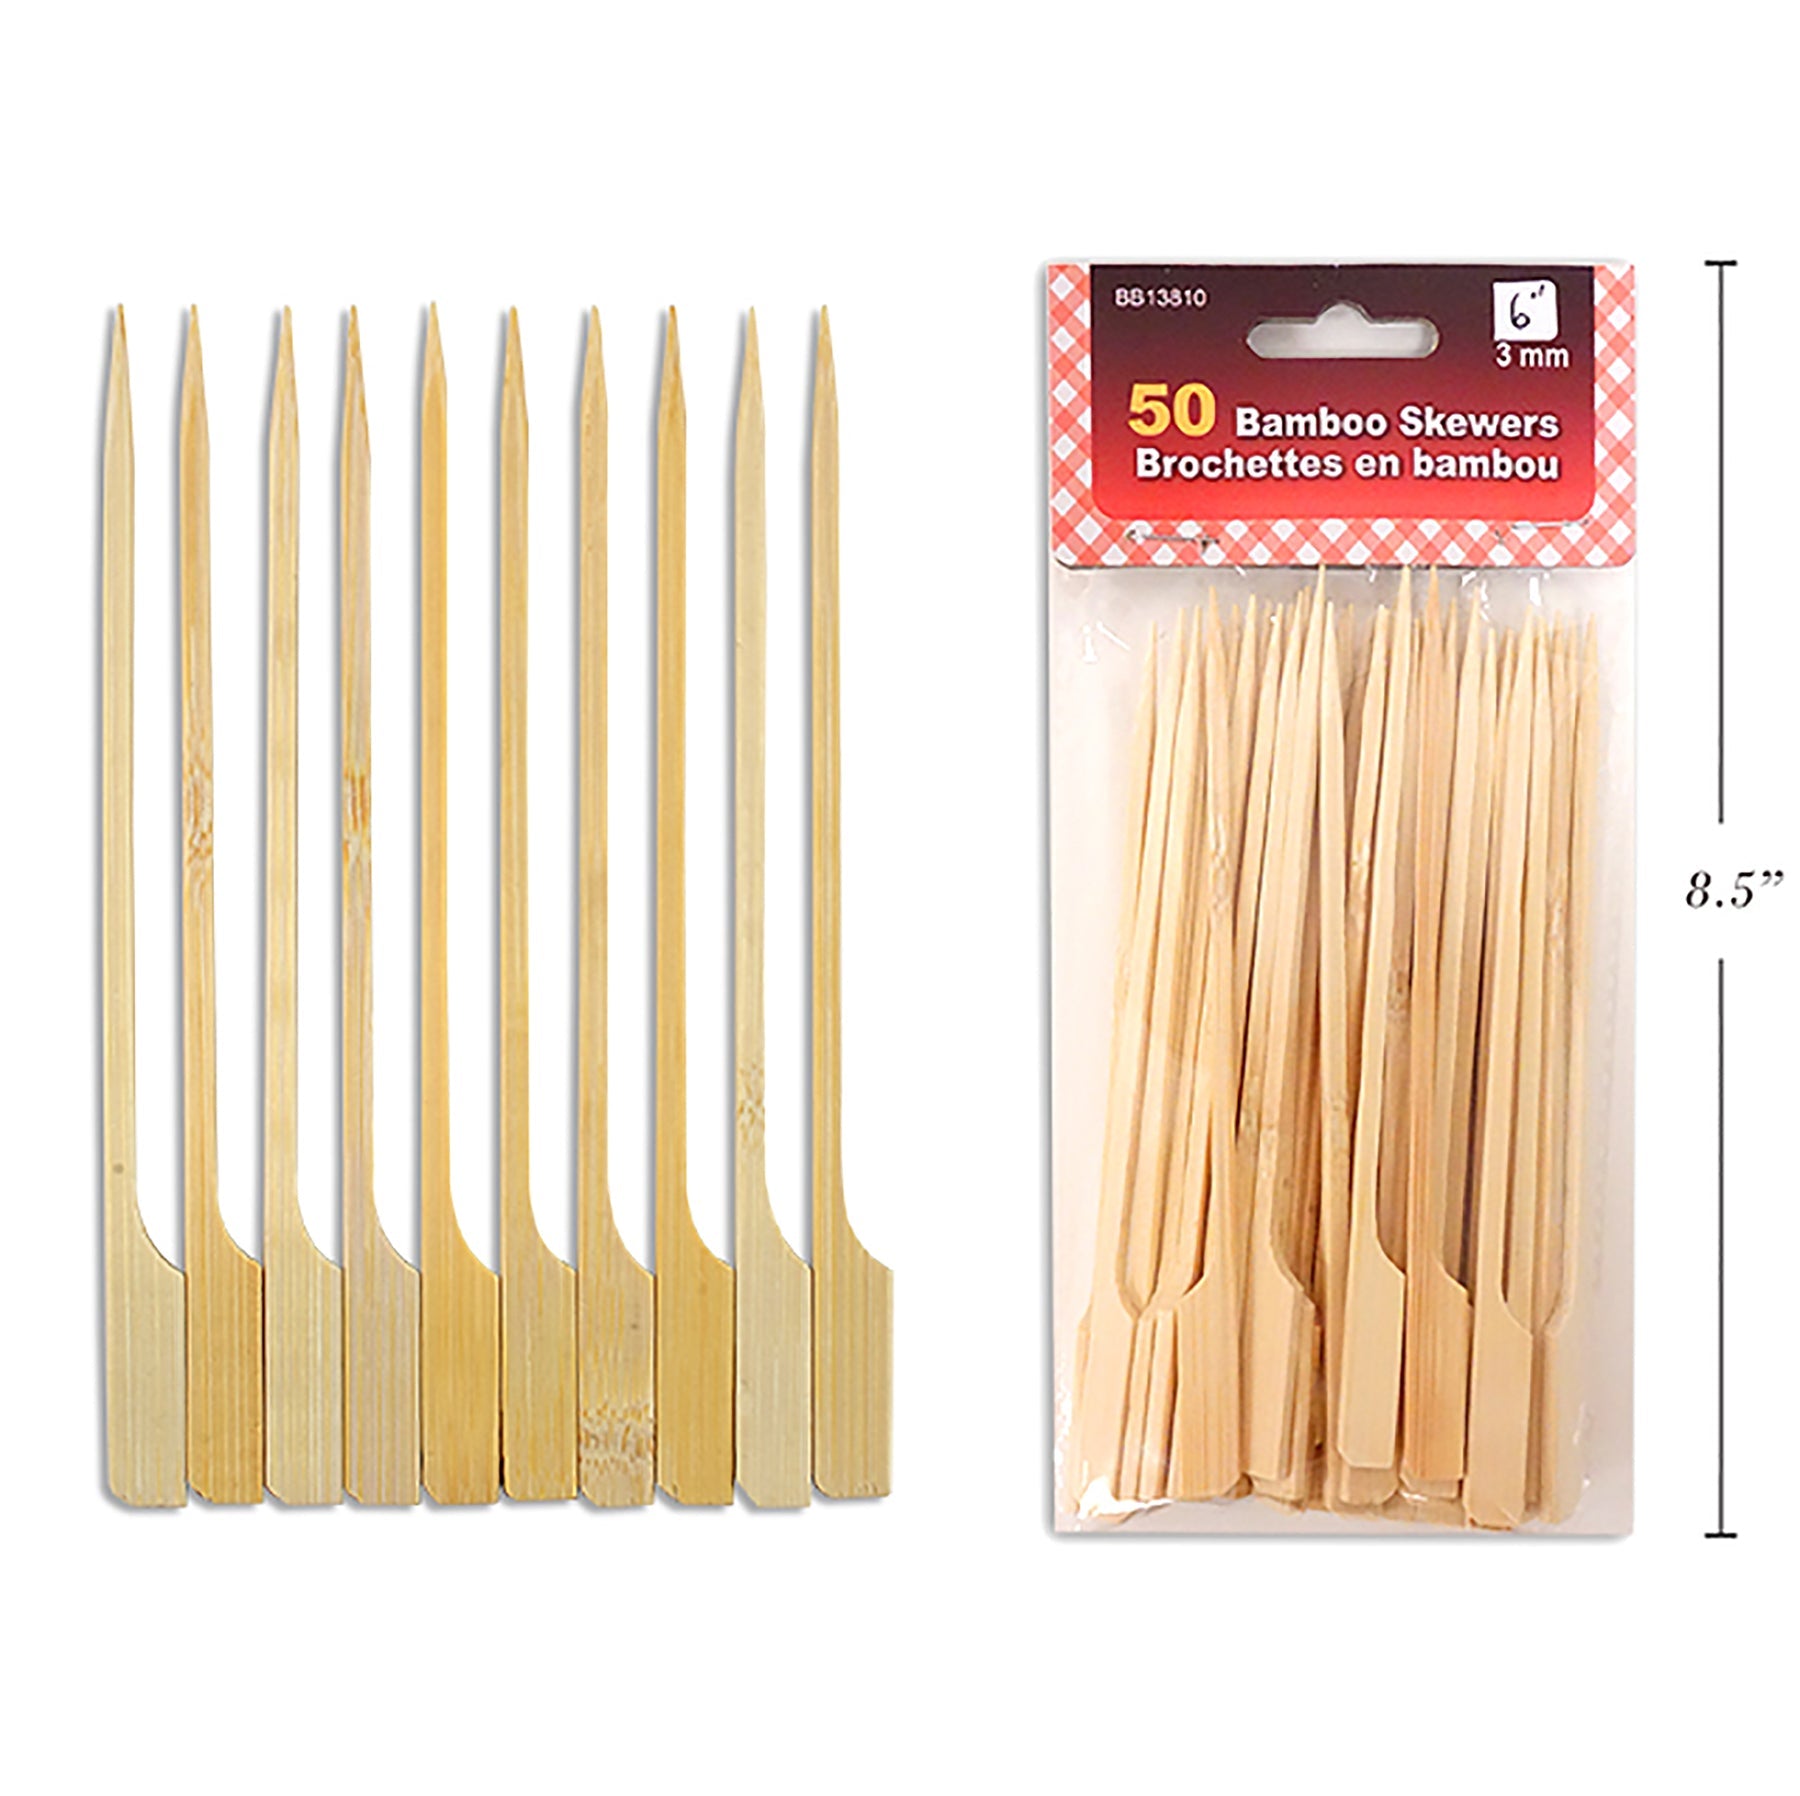 BBQ 50 Bamboo Skewers 6in